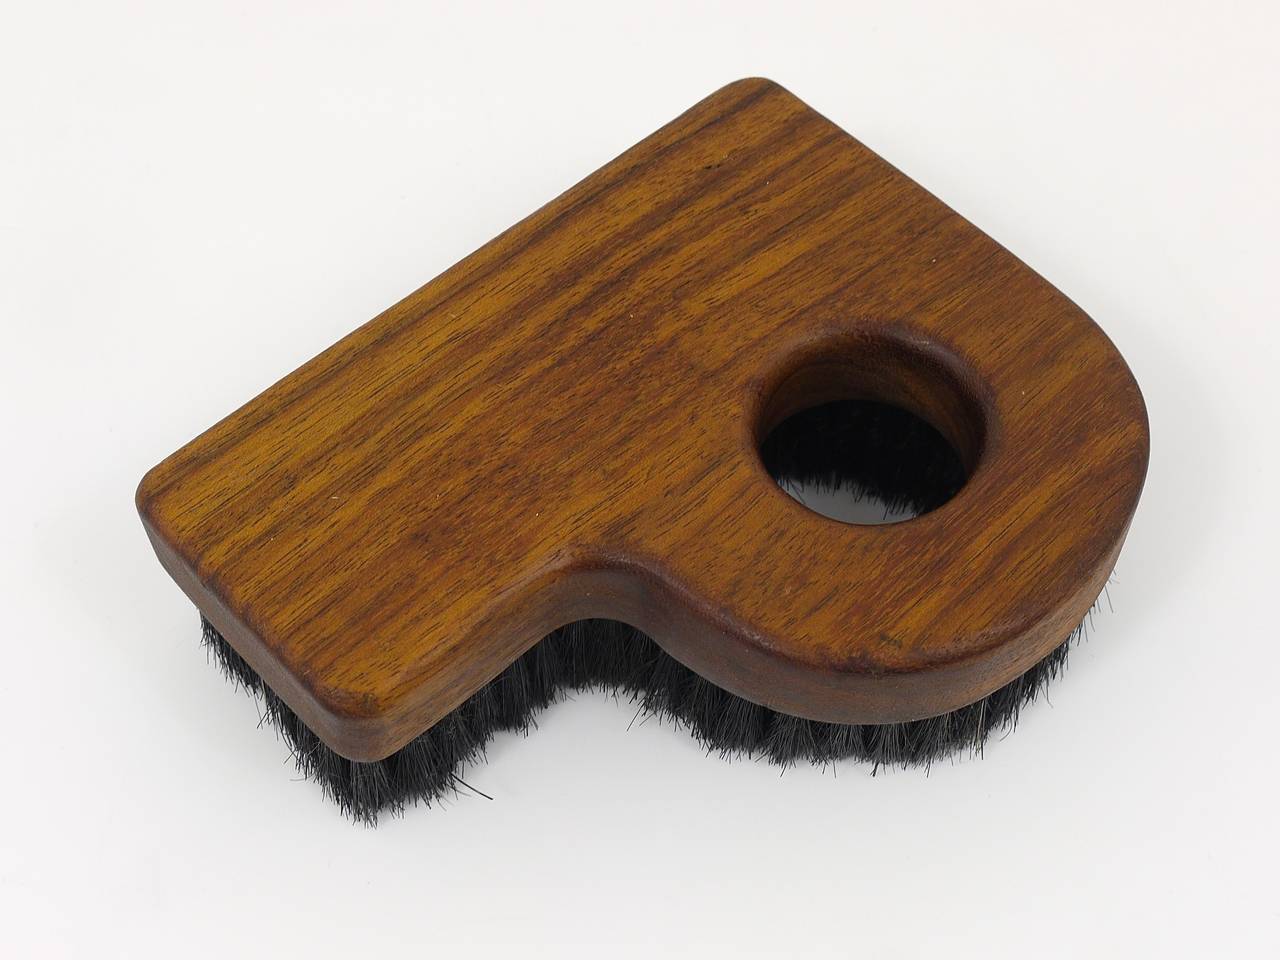 A beautiful P-shaped modernist clothes brush, designed and executed by Carl Aubock, Vienna, in the 1950s. Made of walnut and natural bristles. In excellent condition.